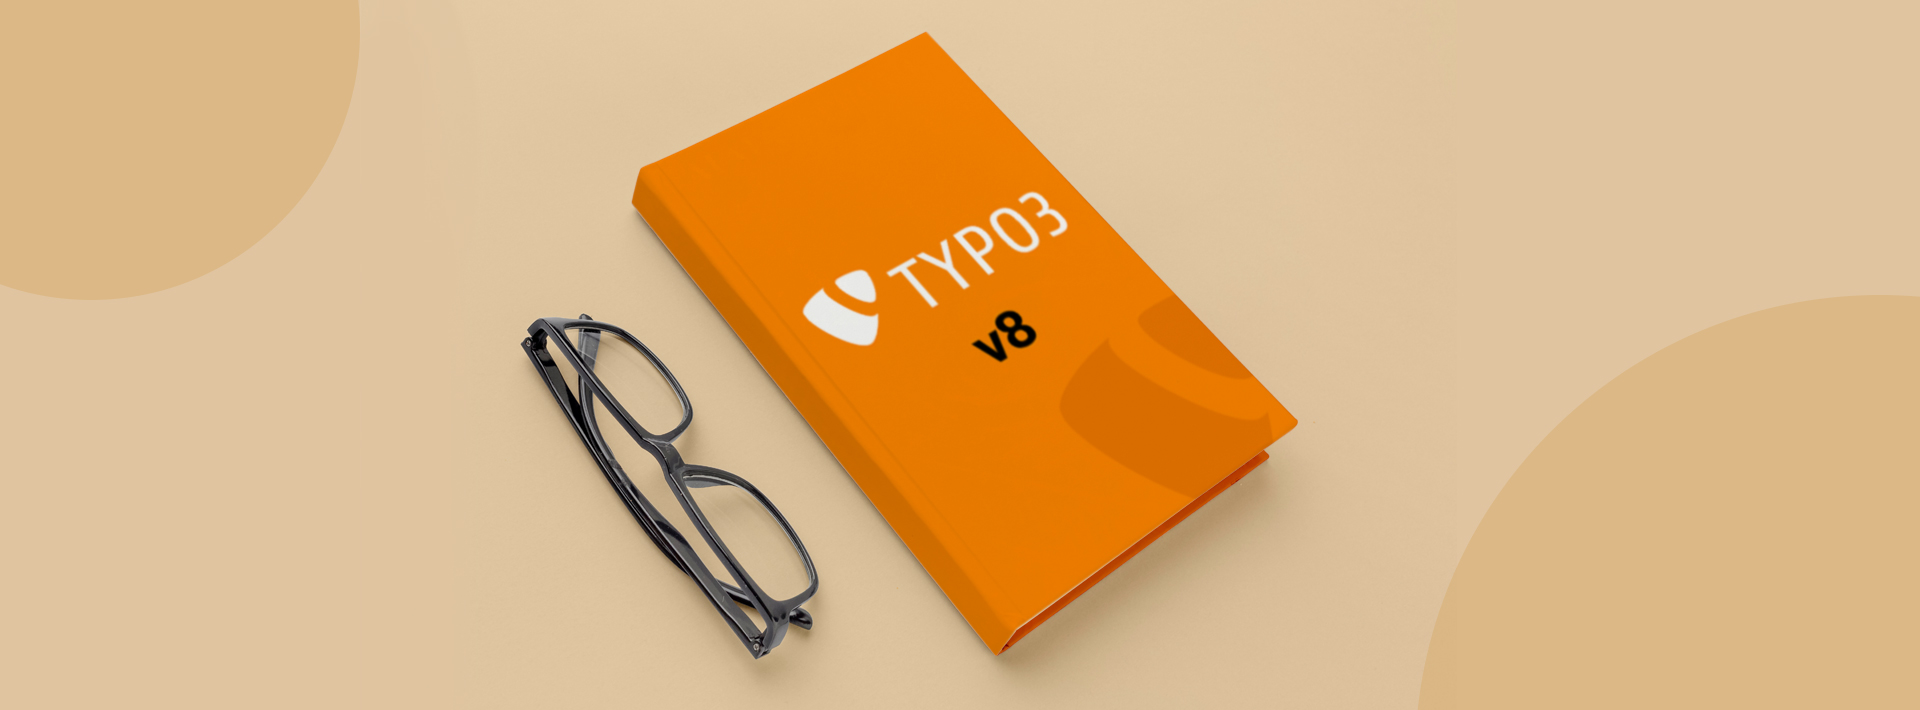 A complete guide to TYPO3 v8 CMS